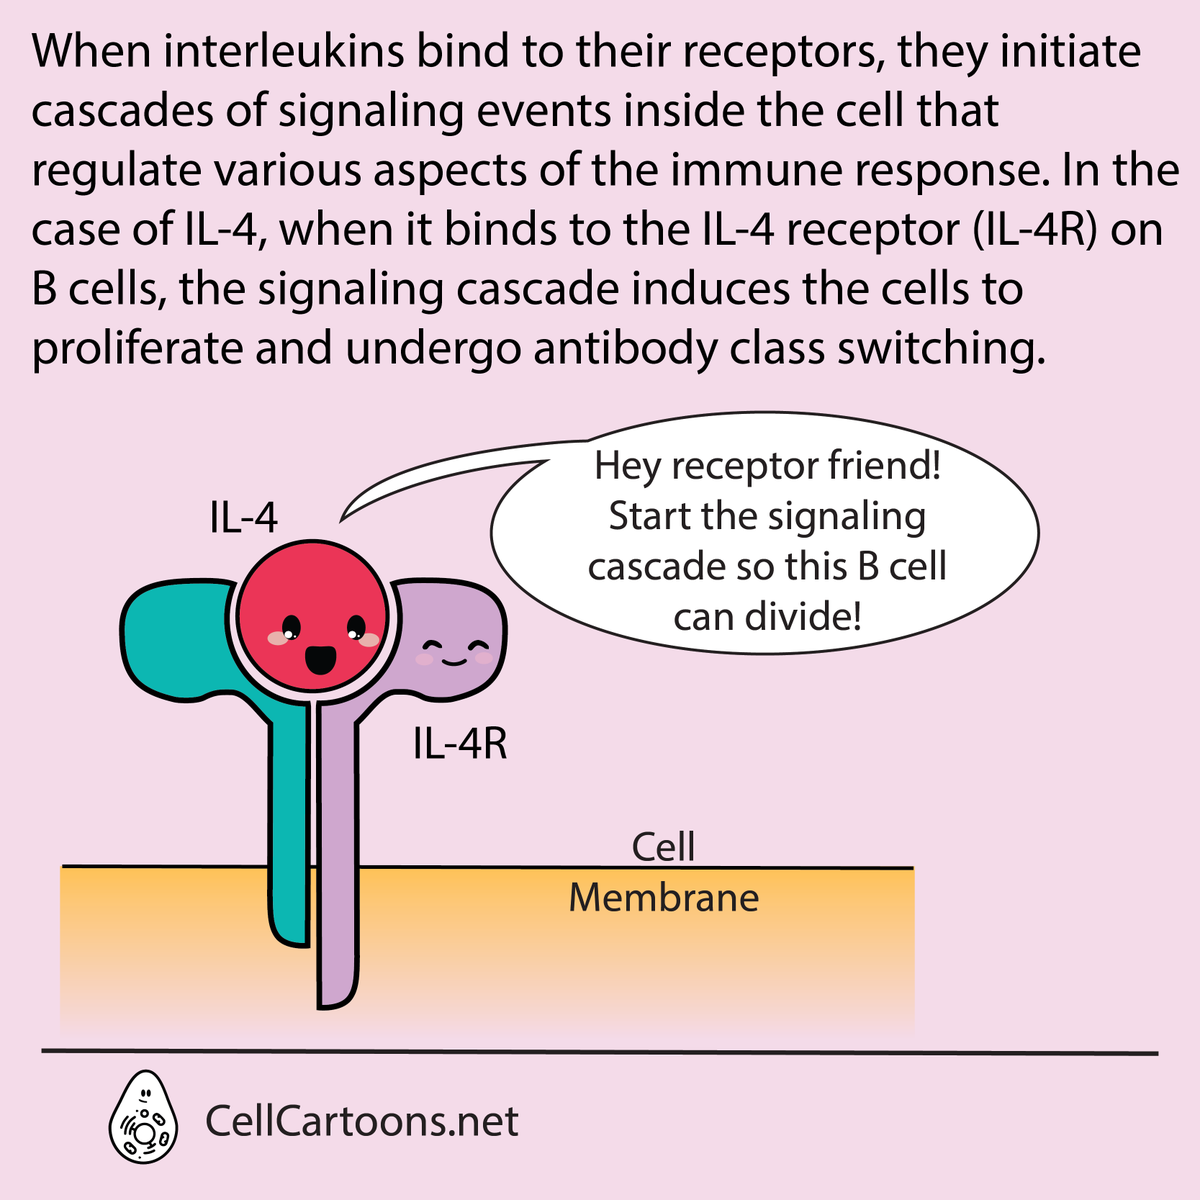 The next one in this ABCs of Immunology: I is for interleukins.
Do you have a favorite #interleukin?
#CellCartoons #SciArt #ScienceArt #MedicalArt #sciencecommunication #sciencecomics #ABCs #iloveimmunology
#immunology